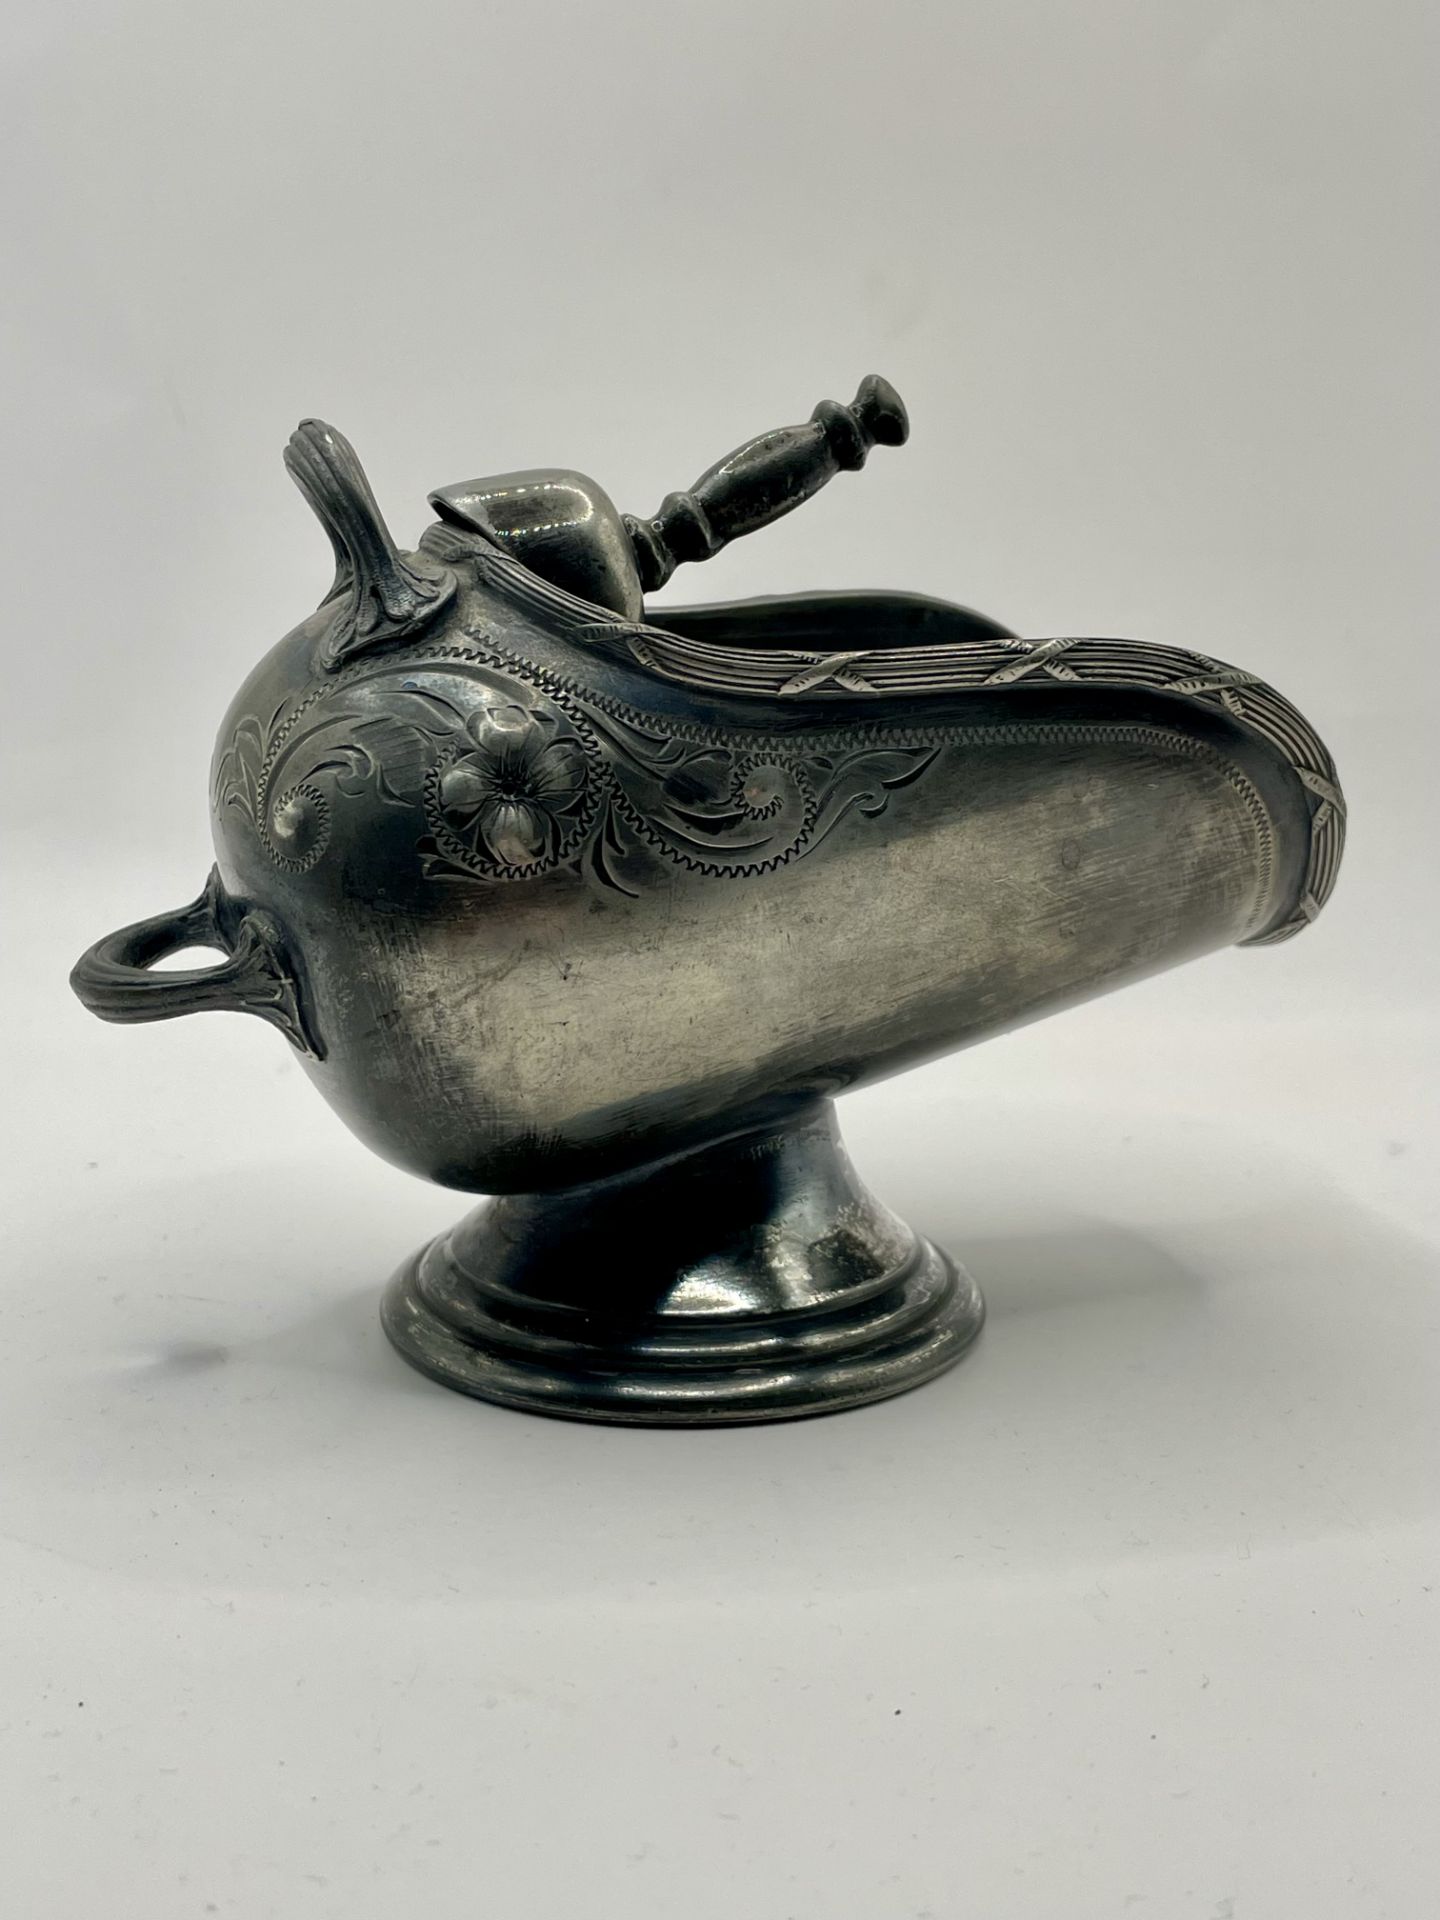 Art Nouveau 1920s Pewter scoop and coal scuttle ornament - Image 7 of 10